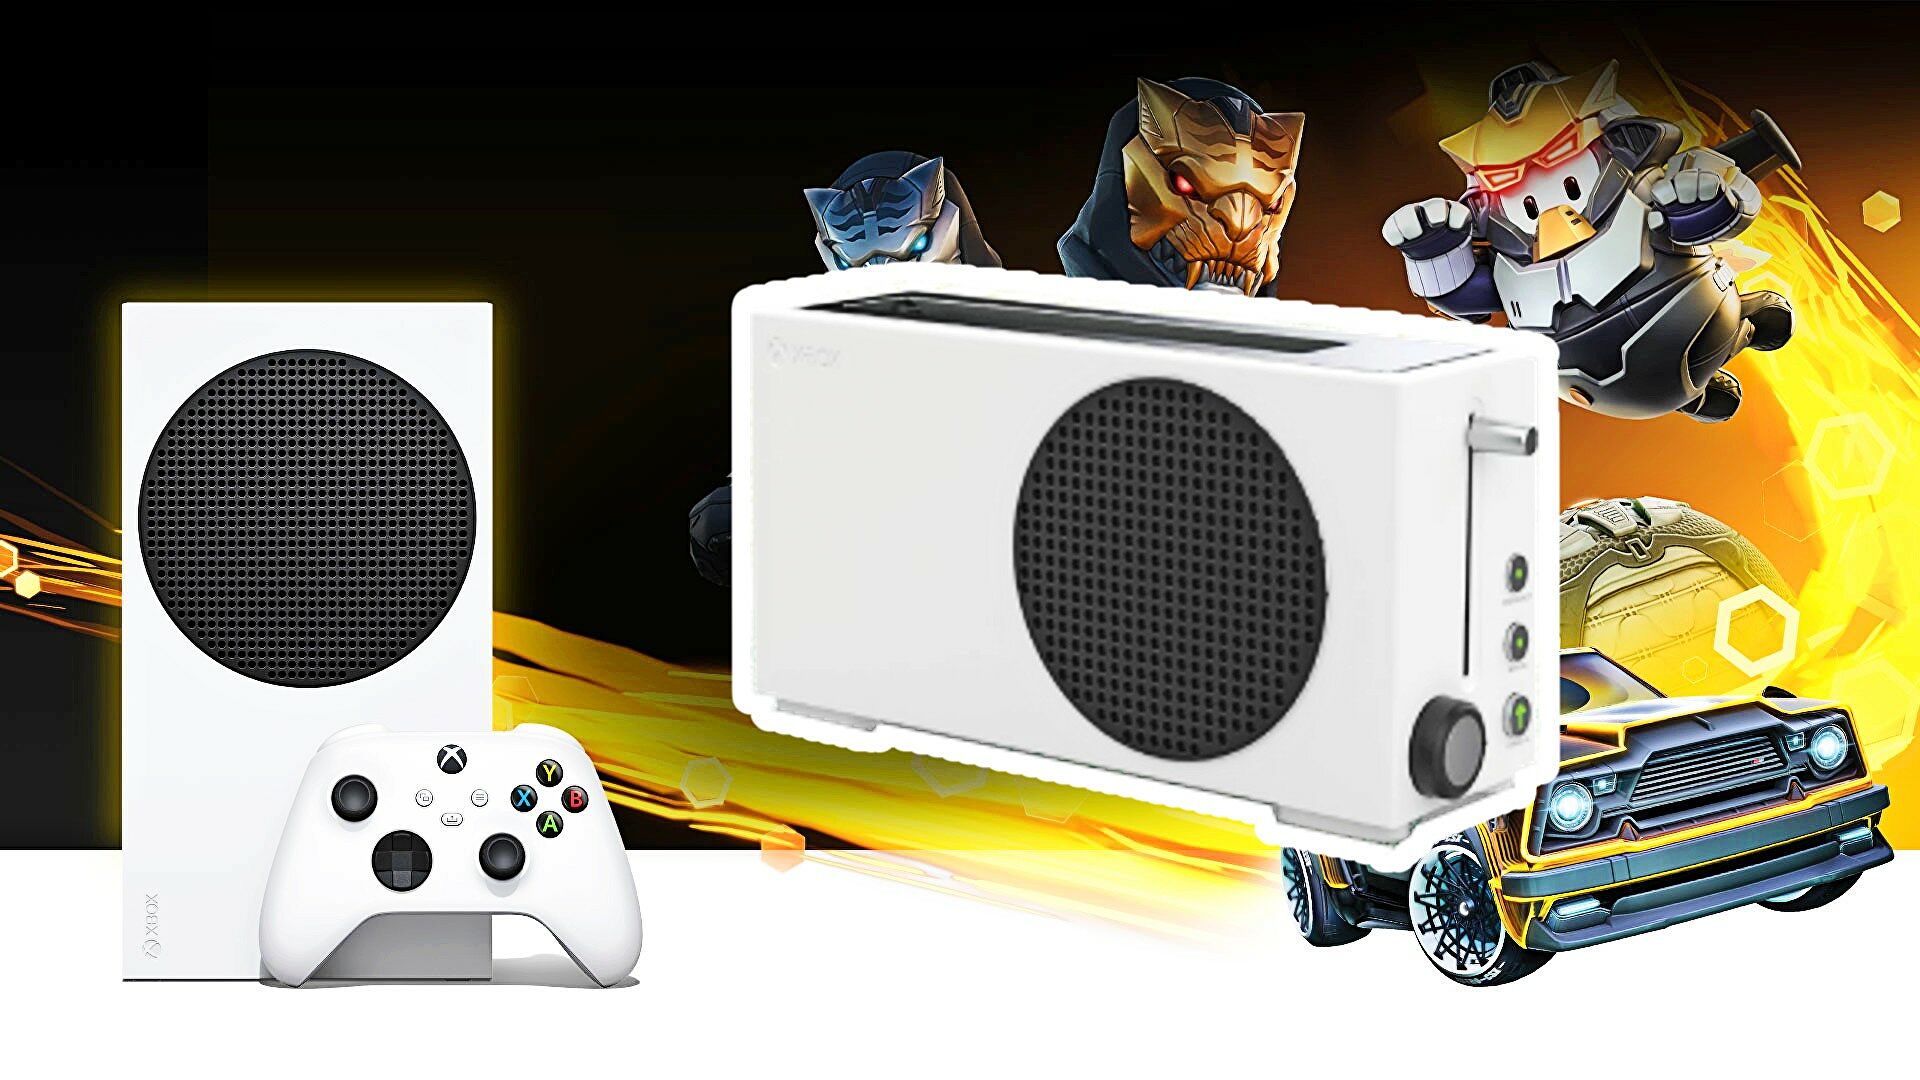 After the Xbox fridge, a toaster could now follow to the Series S